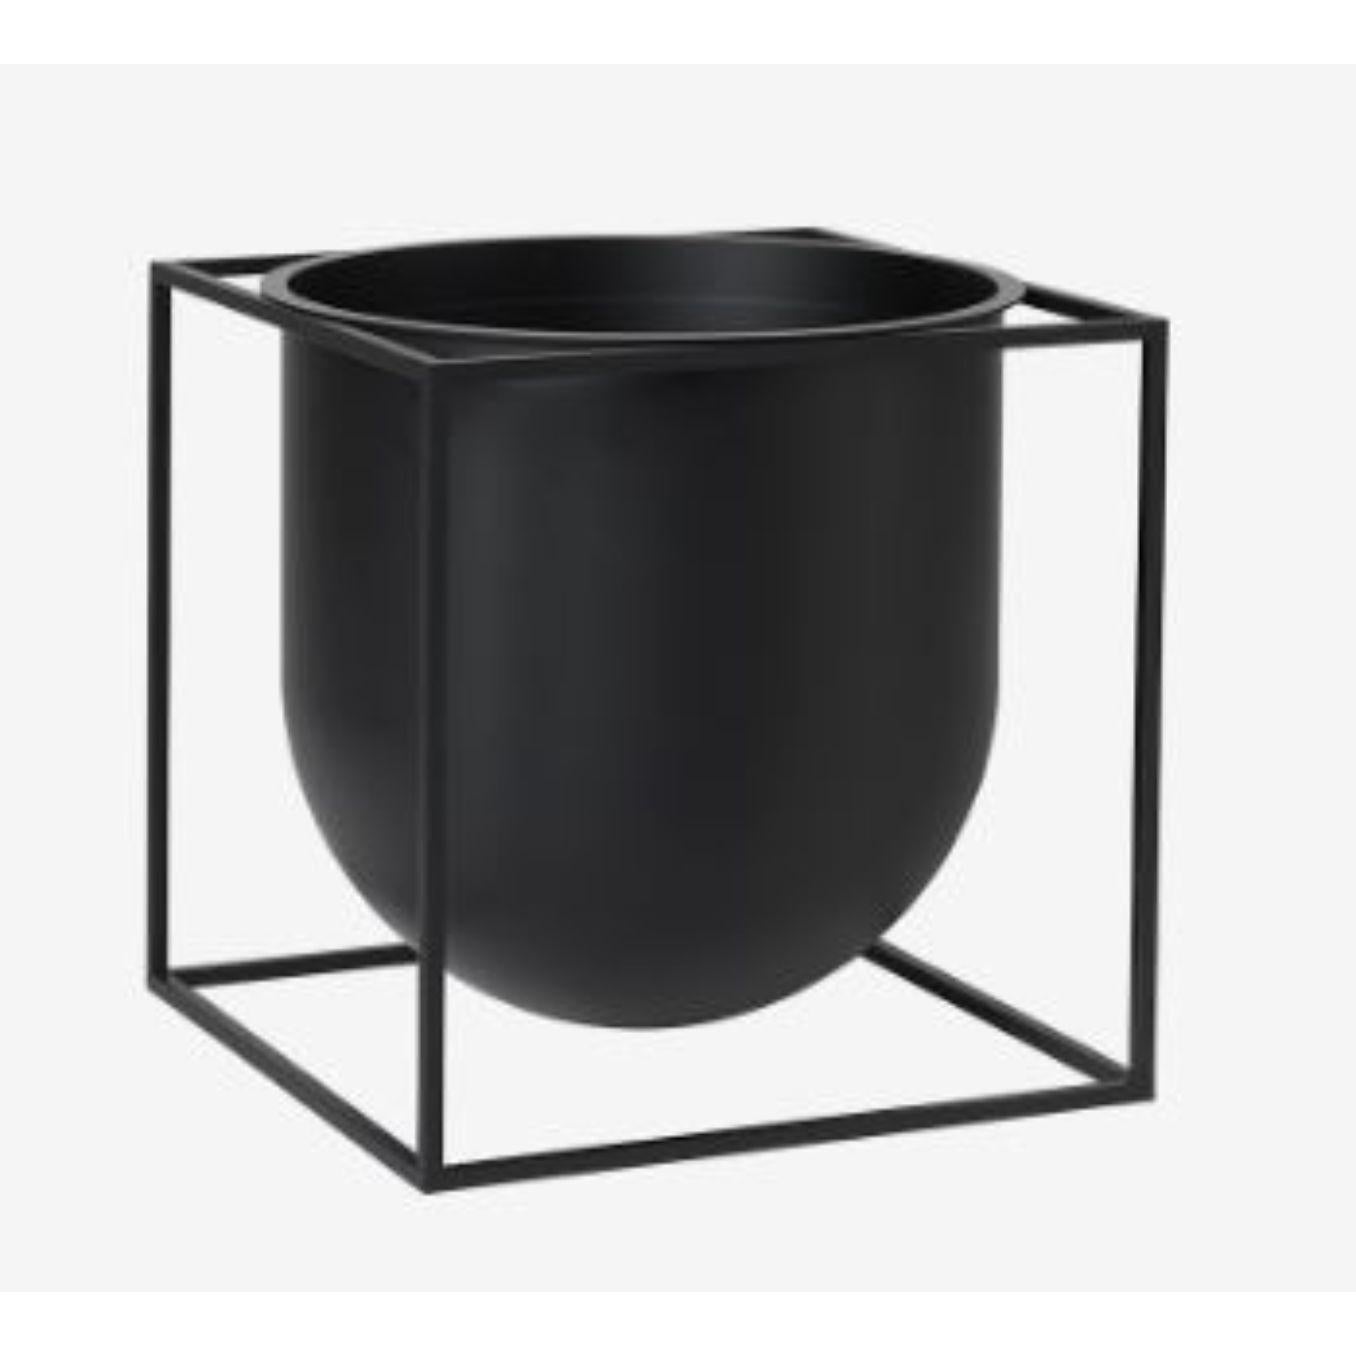 Black flowerpot 23 Kubus vase by Lassen
Dimensions: D 23 x W 23 x H 23 cm 
Materials: Metal 
Weight: 3.30 Kg

Herb pot, vase or a simple container. The possibilities are endless. Another addition to the Kubus collection, Kubus Flowerpots come